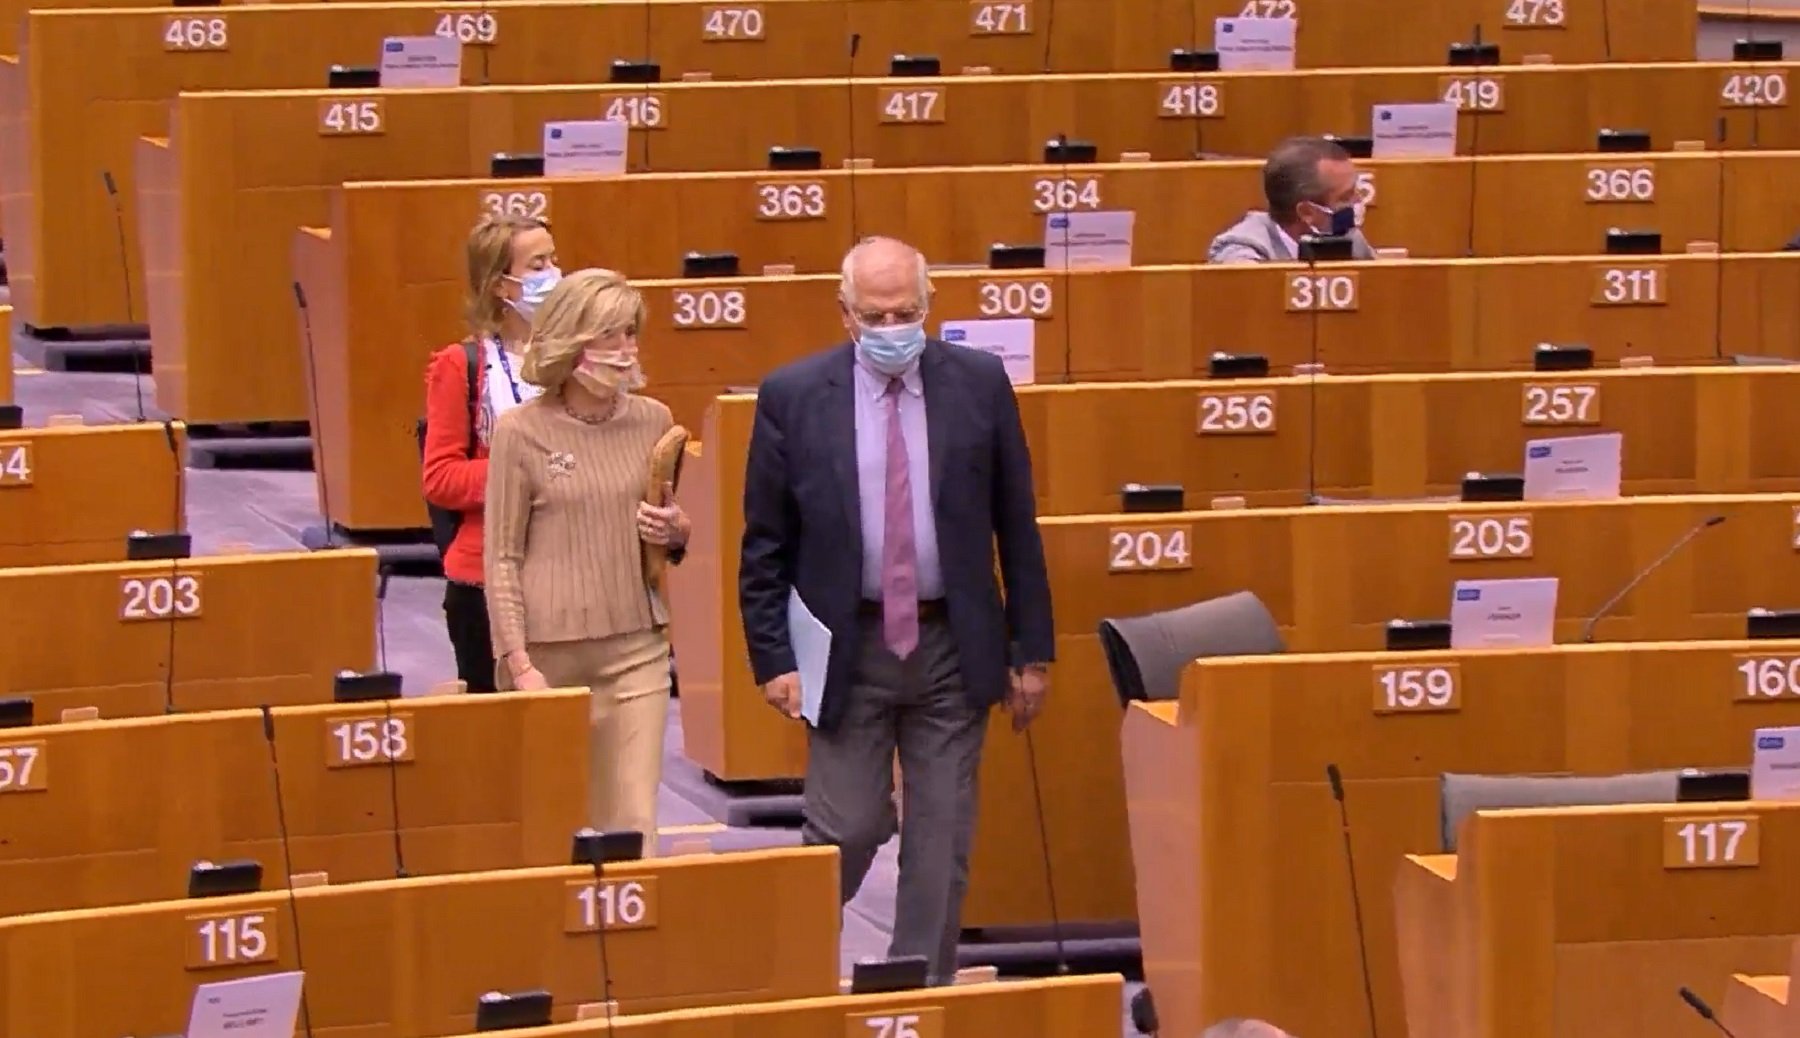 Croatian MEP to Borrell: "Why are we silent about Spain's political prosecutions?"